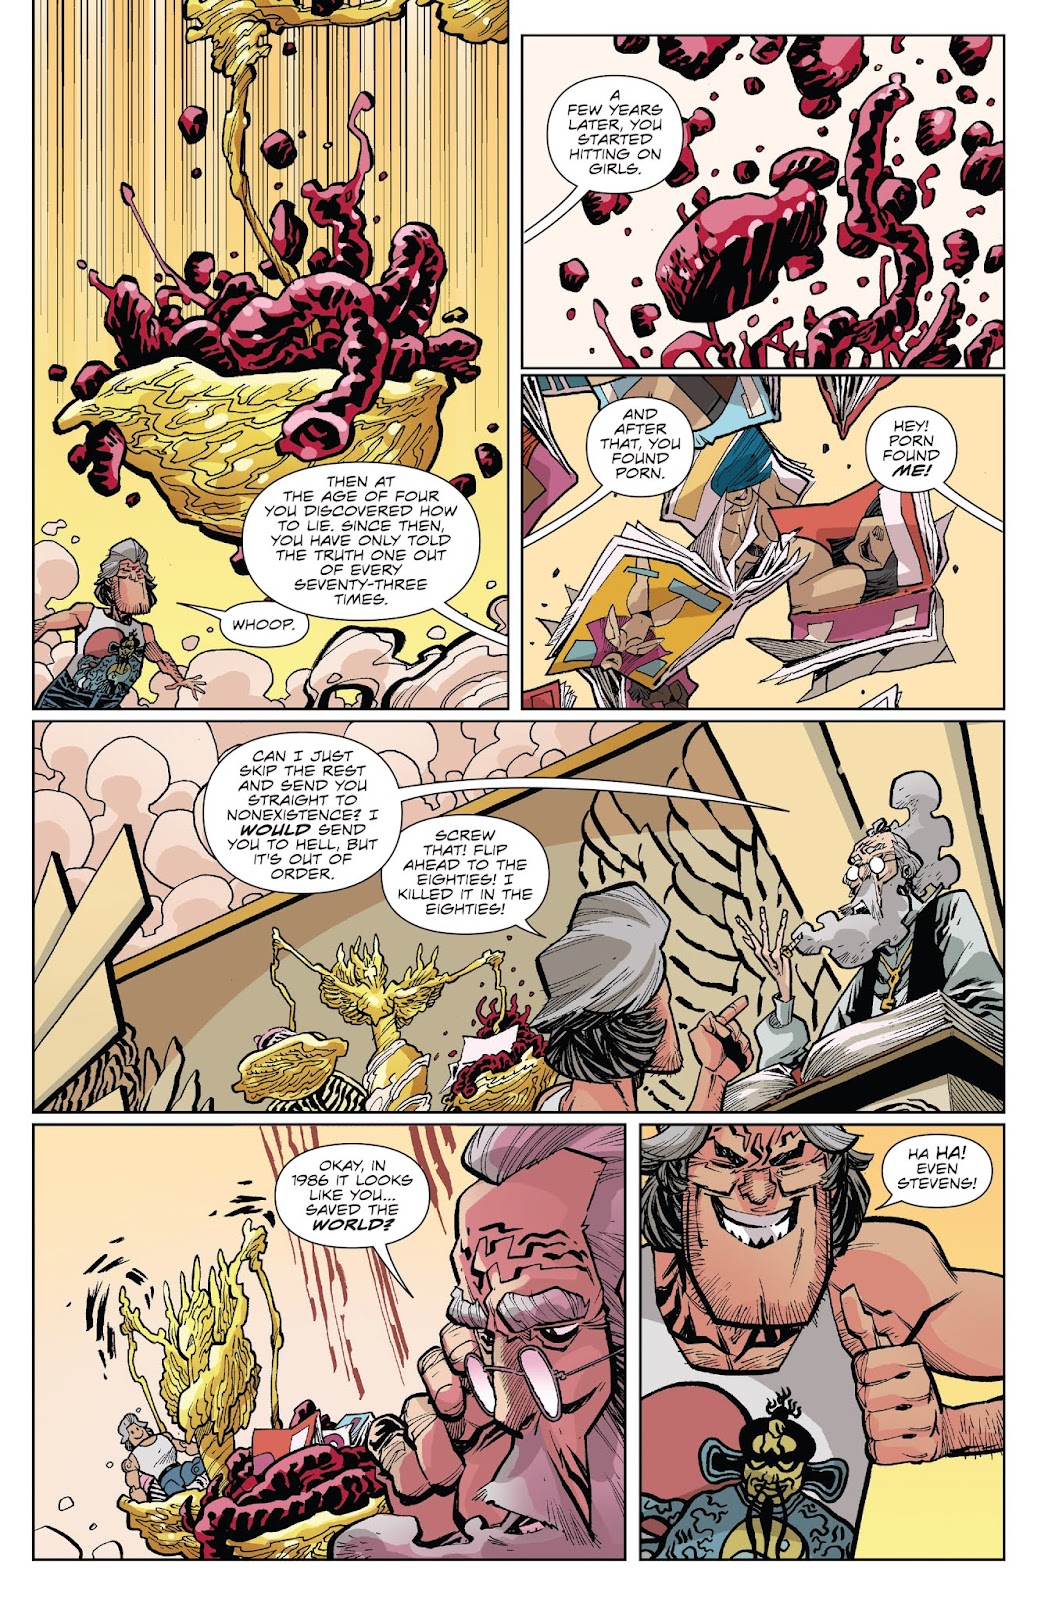 Big Trouble in Little China: Old Man Jack issue 10 - Page 15